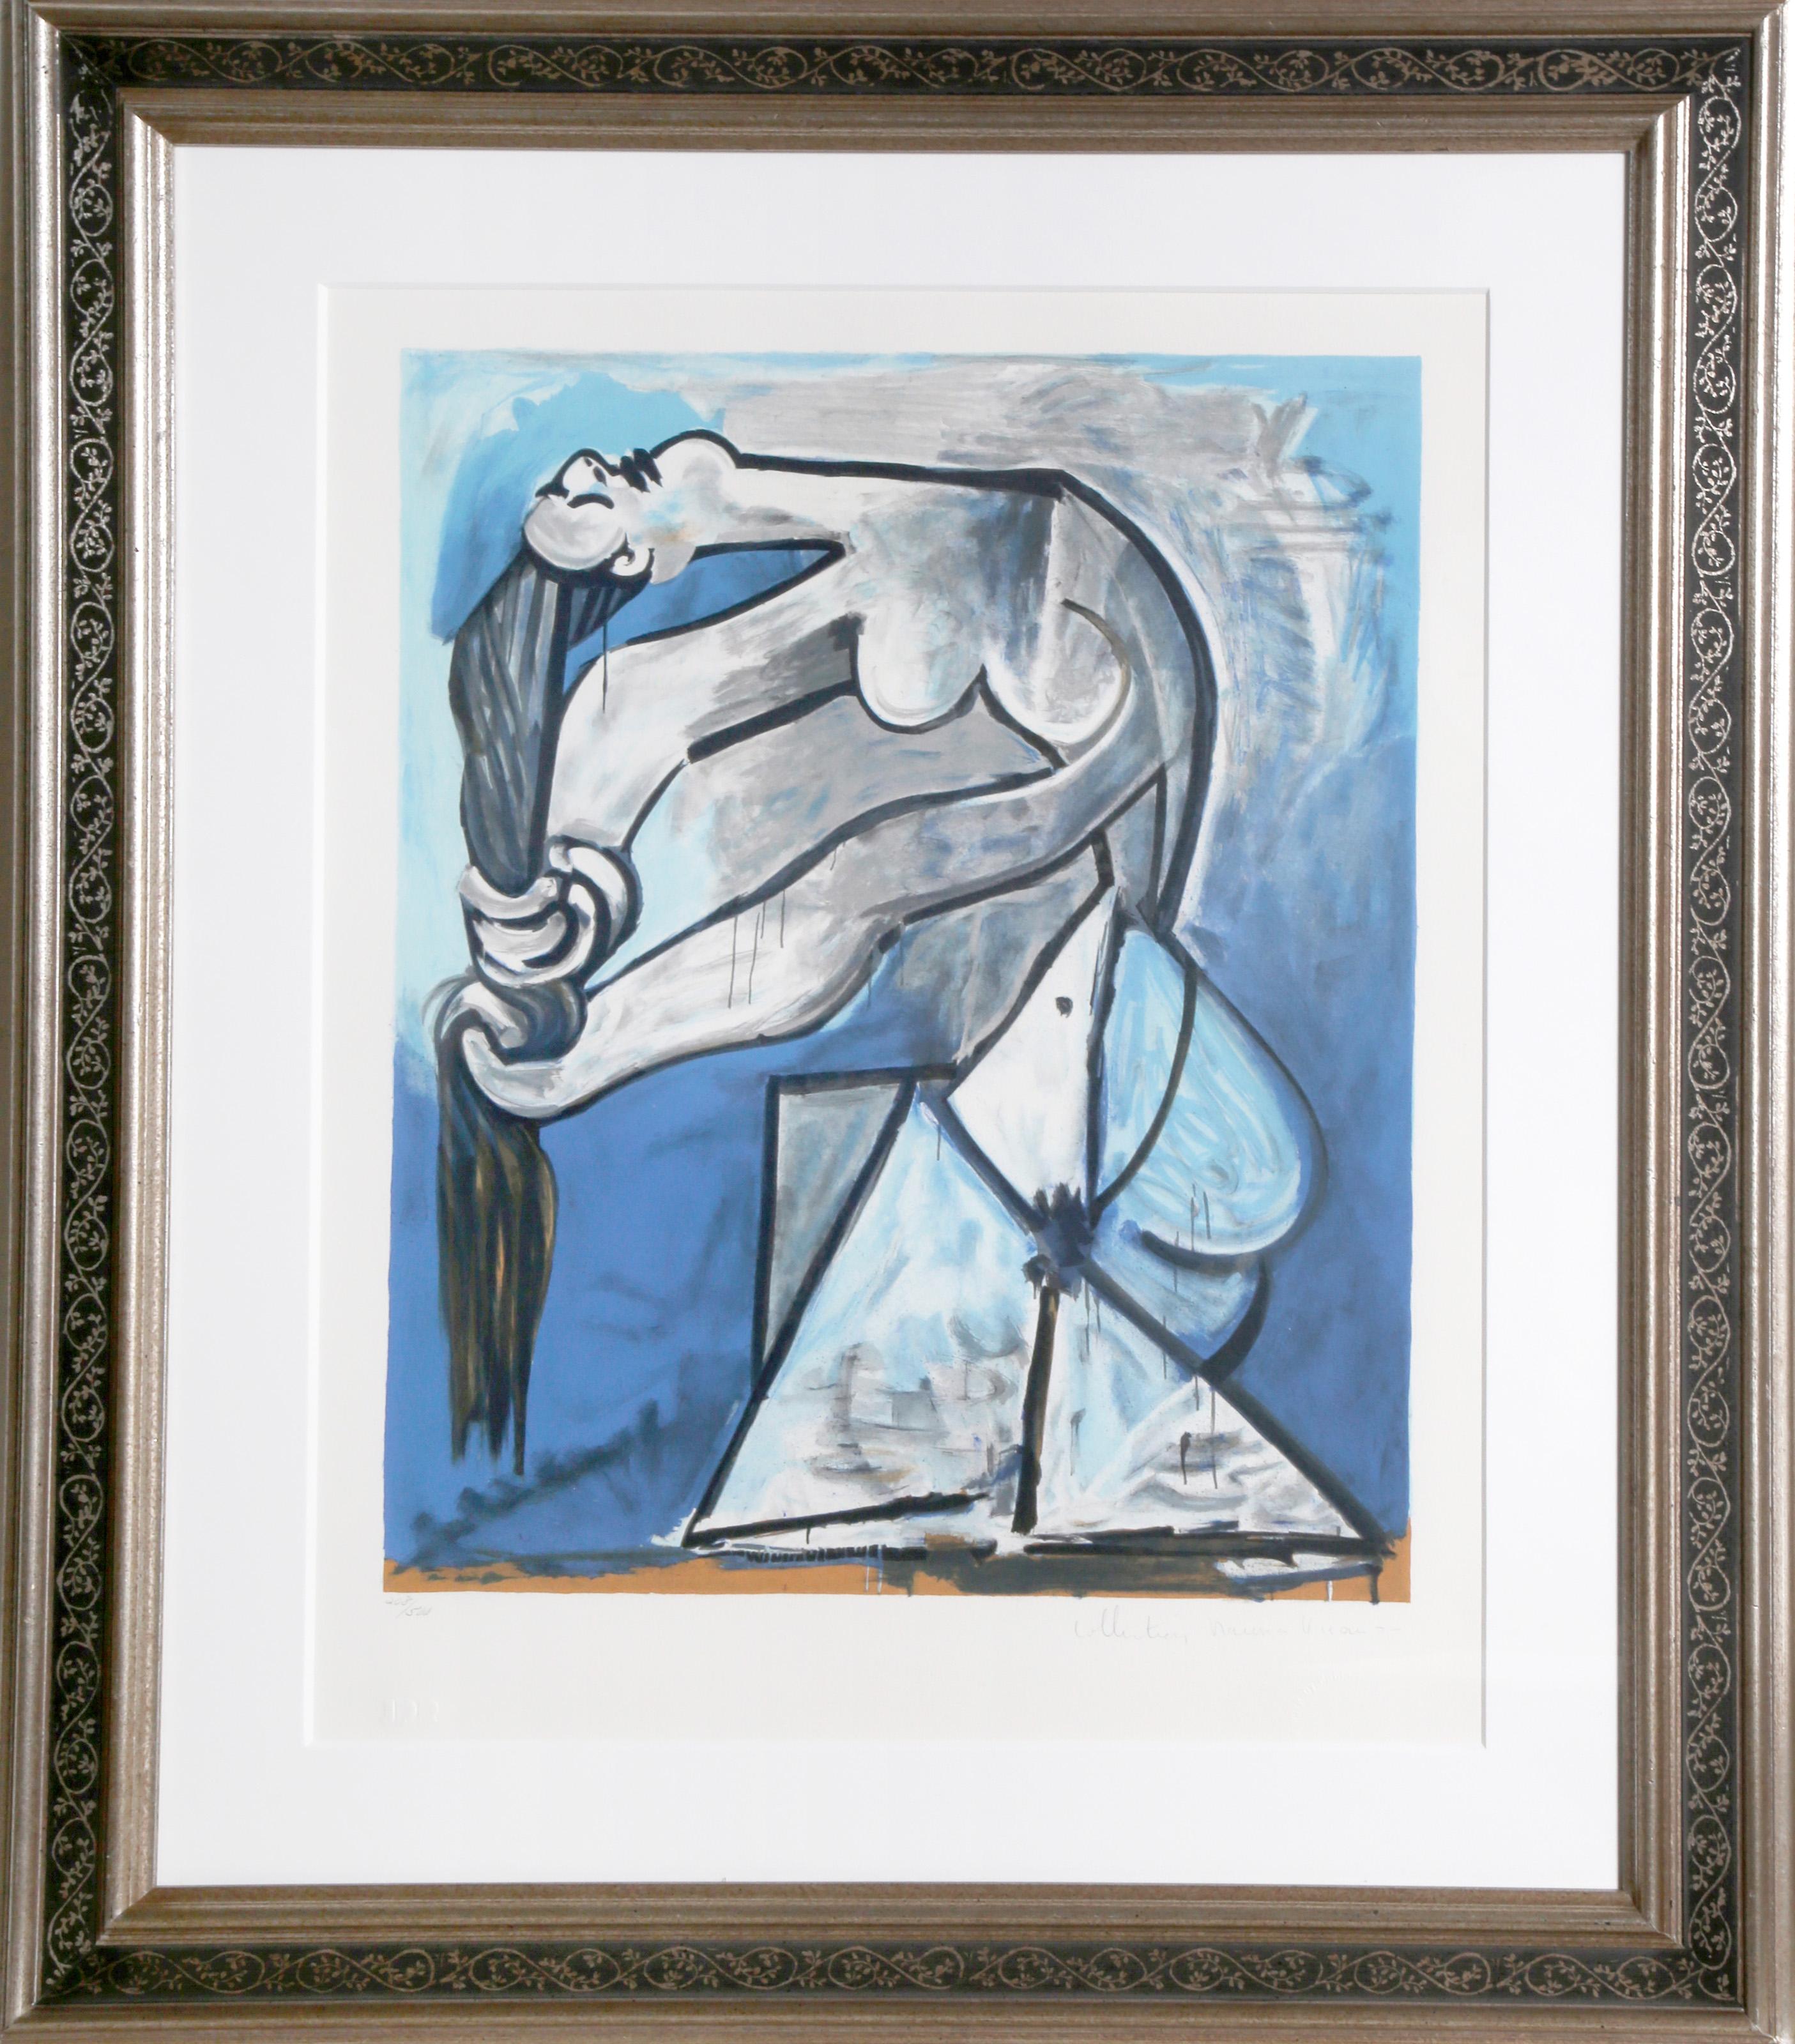 A lithograph reproduction from the Marina Picasso Estate Collection after the Pablo Picasso painting "Ne se tordant les cheveux".  The original painting was completed in 1952. In the 1970's after Picasso's death, Marina Picasso, his granddaughter,